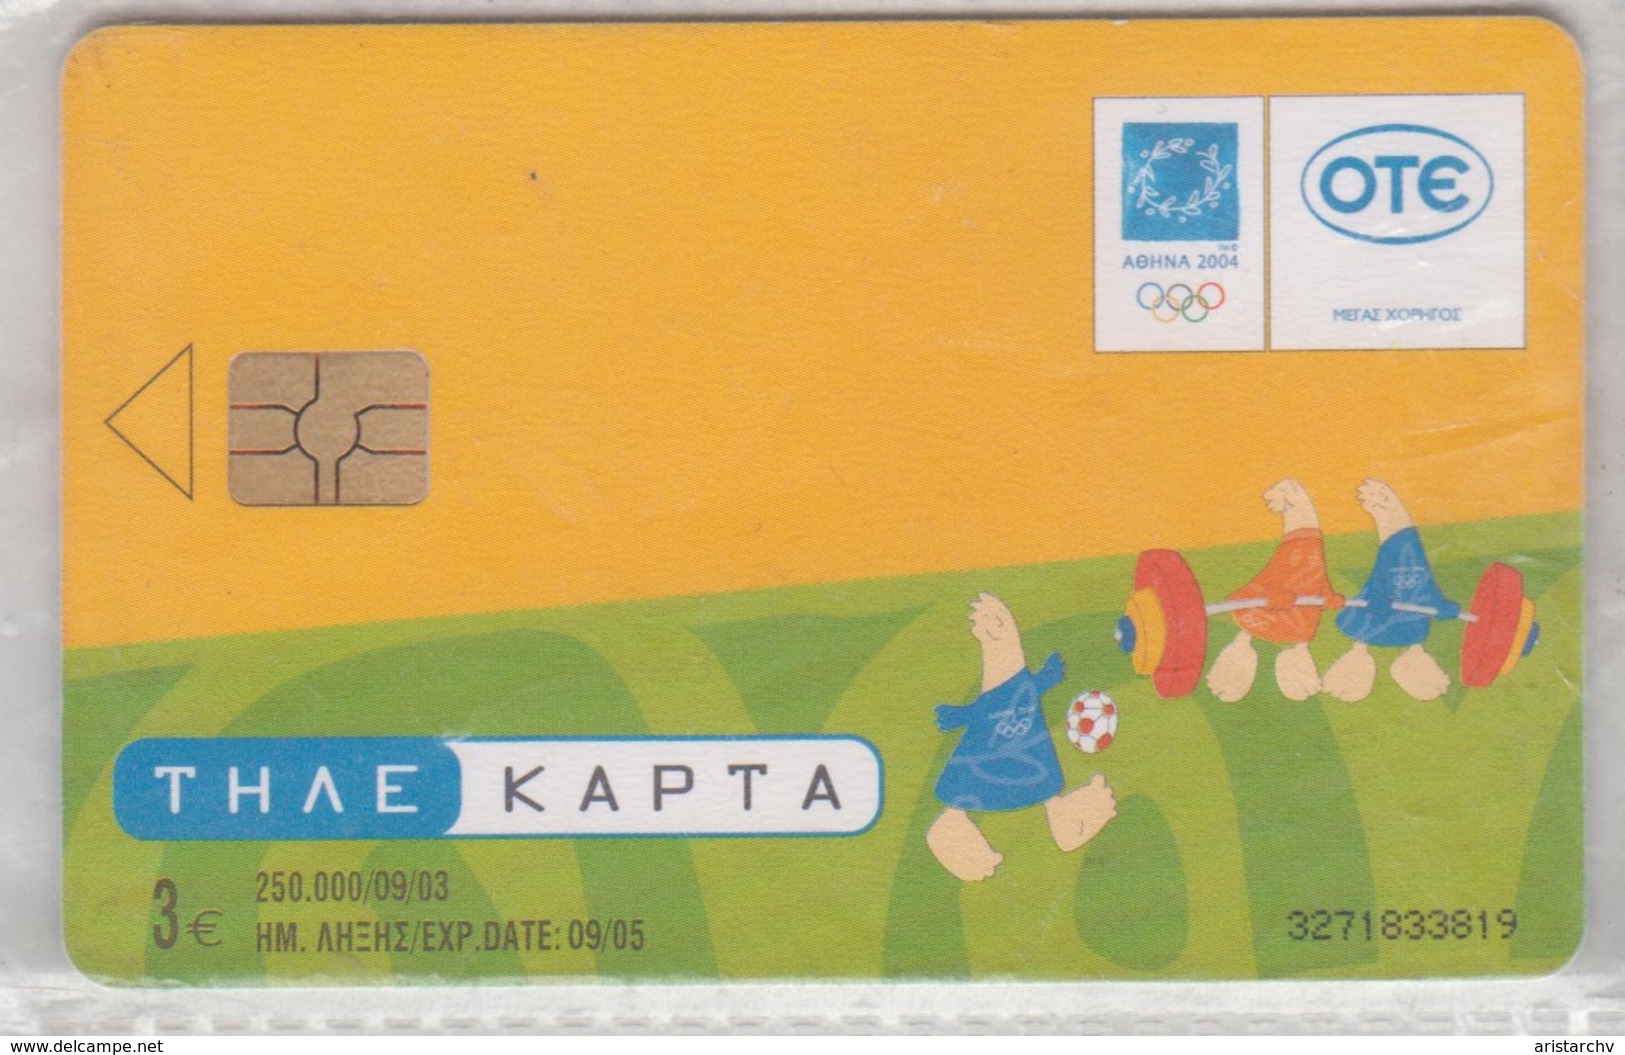 GREECE 2004 OLYMPIC GAMES ATHENS FOOTBALL WEIGHTLIFTING ARCHERY SWIMMING BADMINTON EQUESTRIAN - Juegos Olímpicos